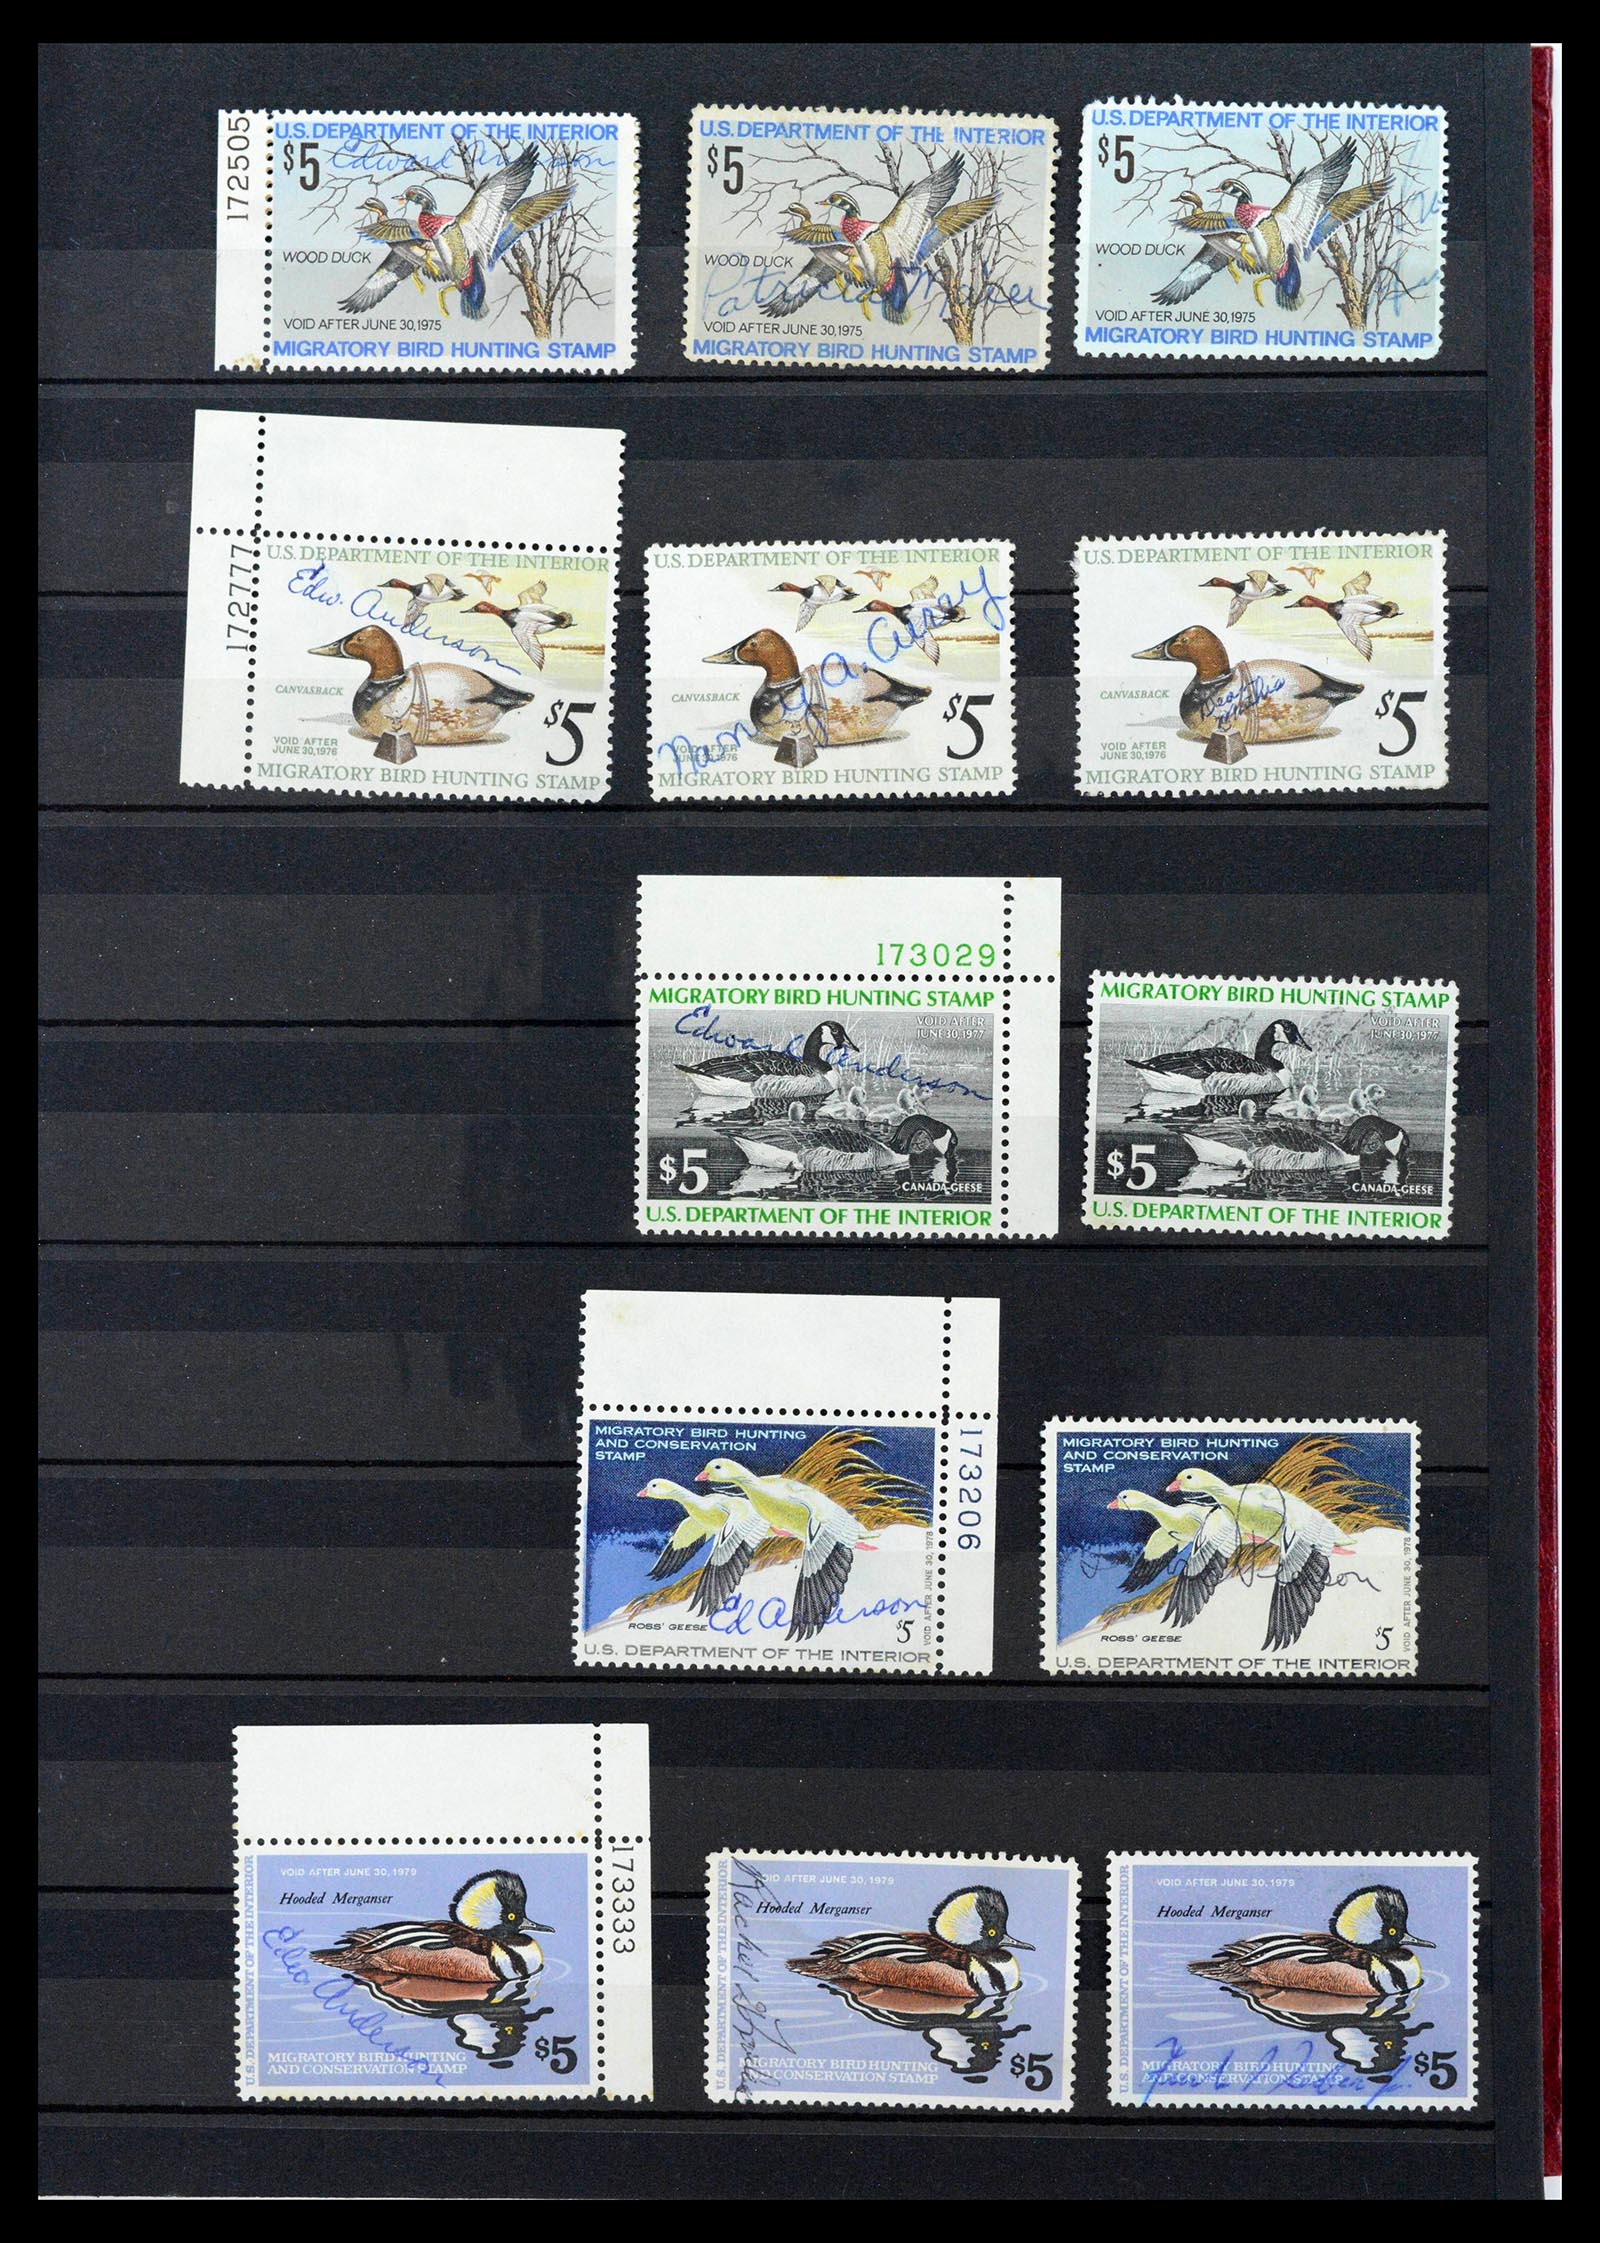 39426 0009 - Stamp collection 39426 USA duckstamps 1934-2007.